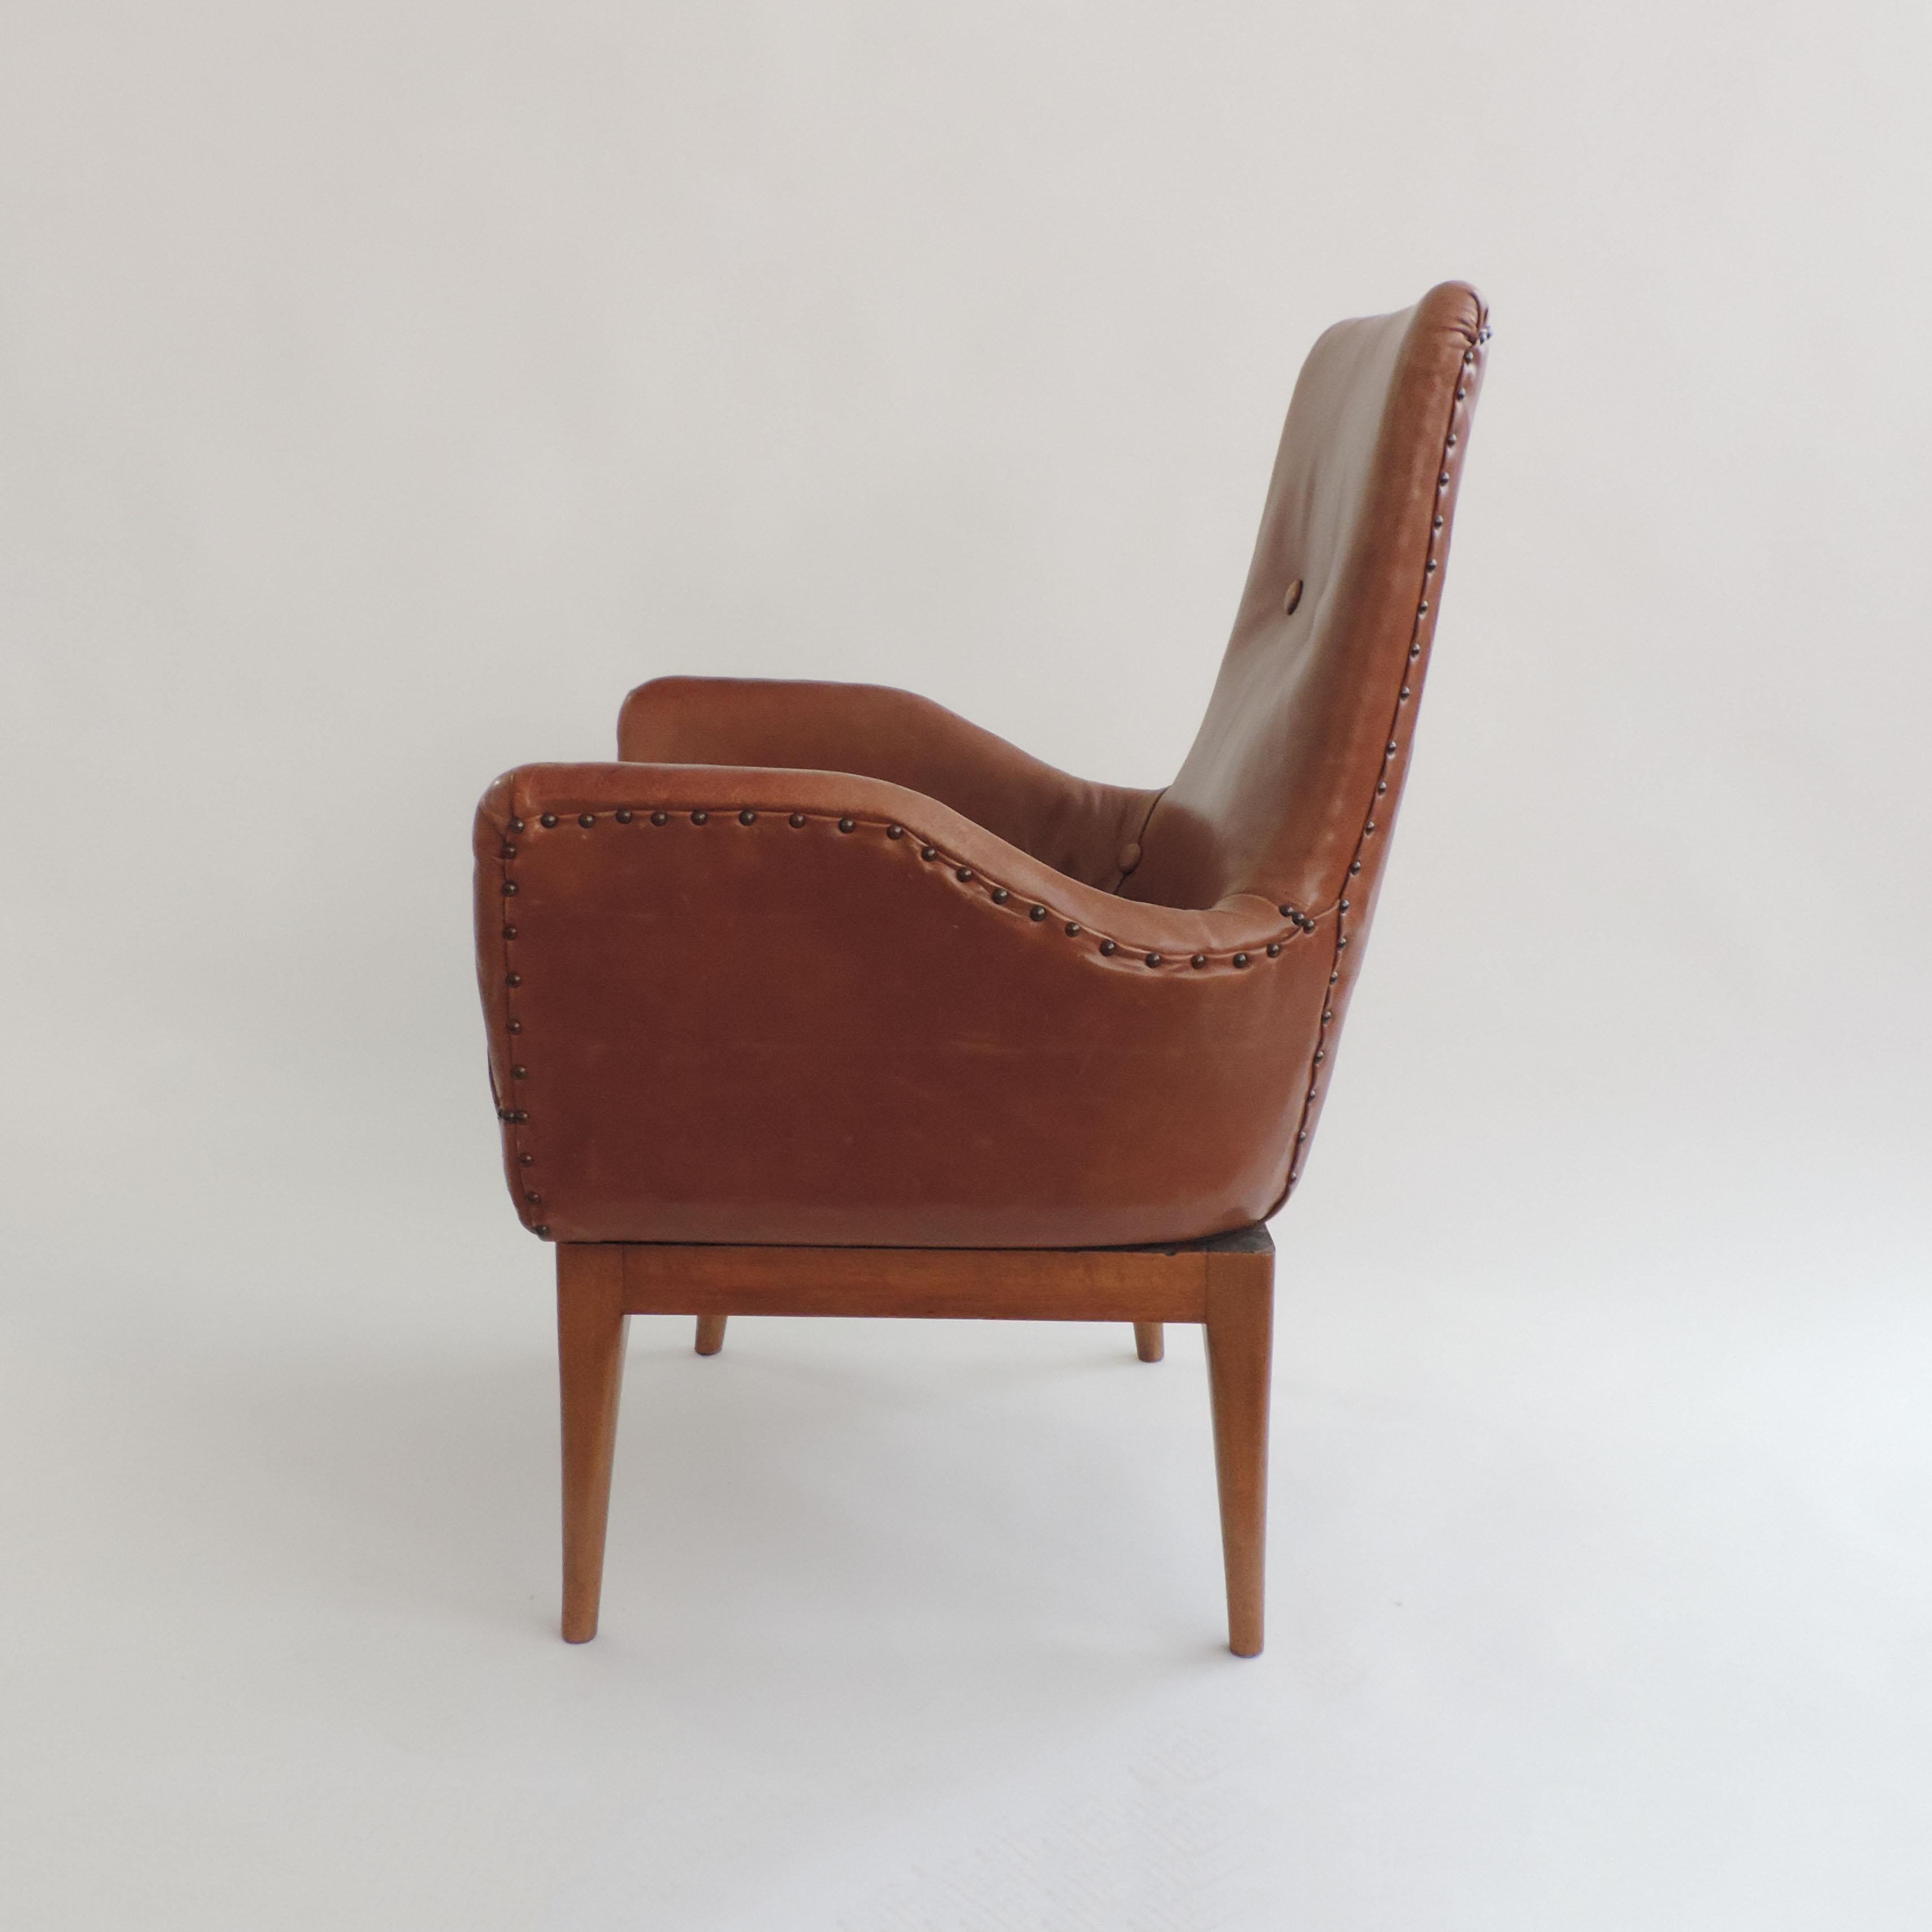 Giovanni Gariboldi Swivel chair in leather and wood,
Superb office chair.